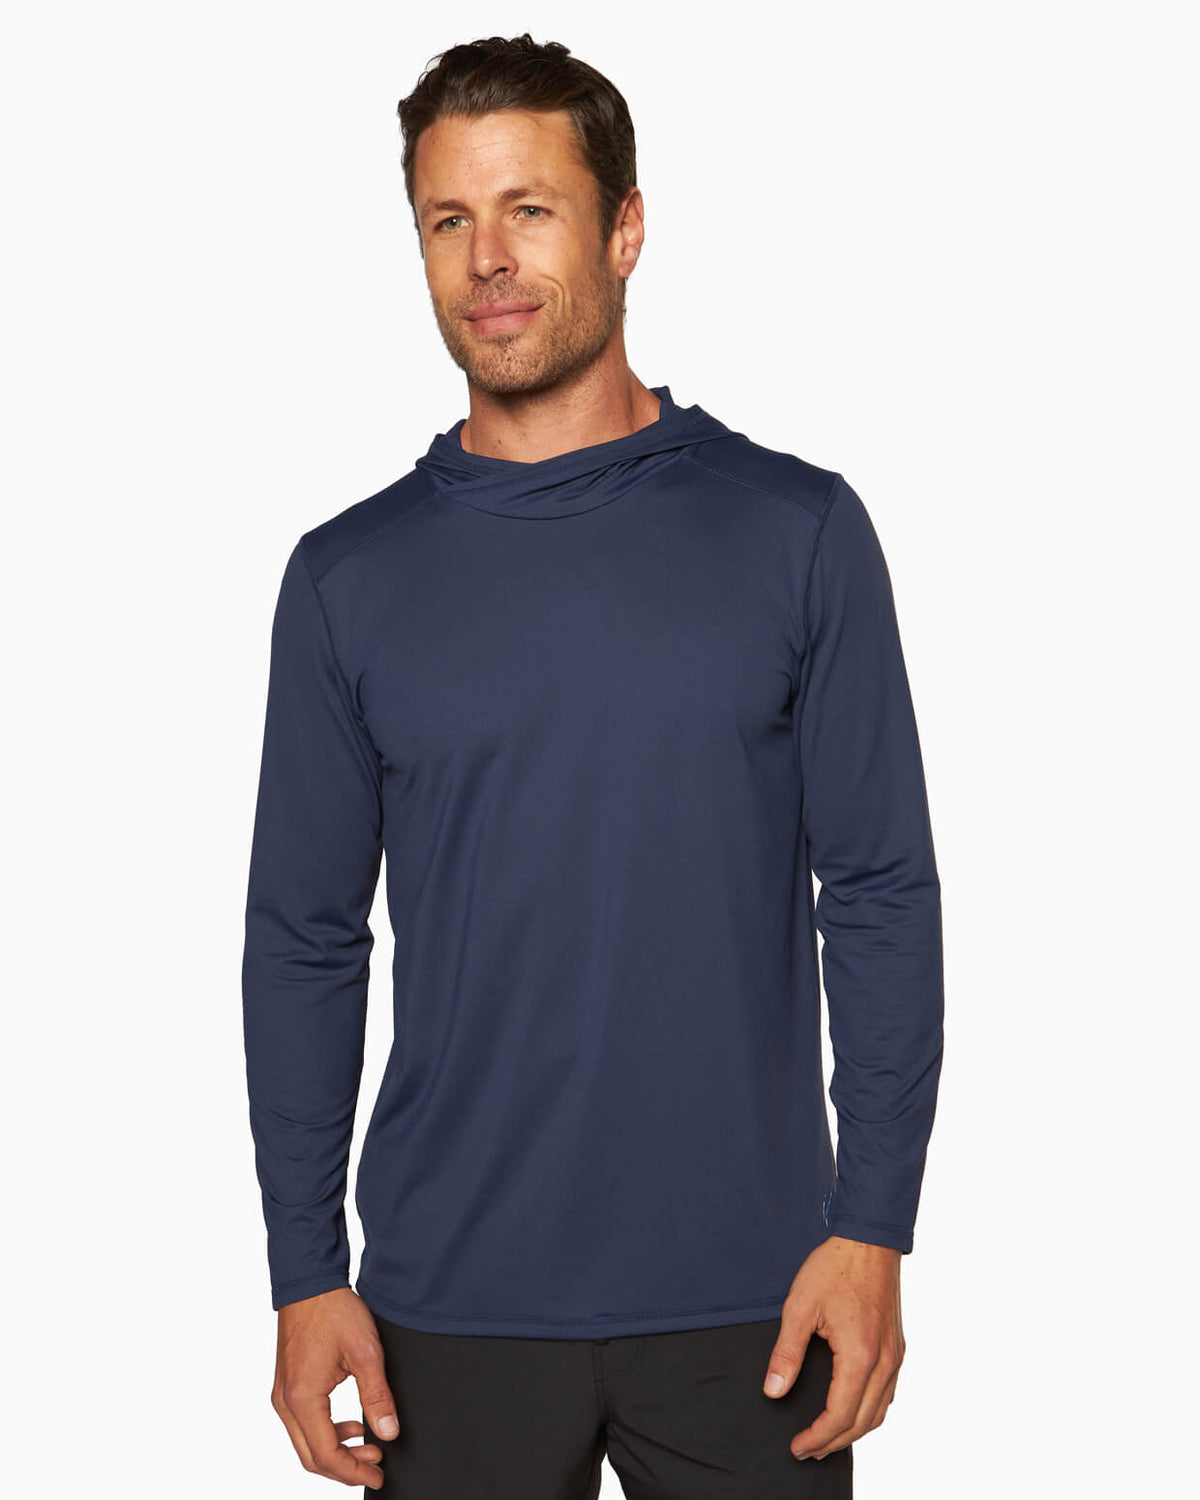 Crows Nest Element Guard | UPF 50+ Long Sleeve UV Protective Shirt ELEMENT NAVY front #color_navy